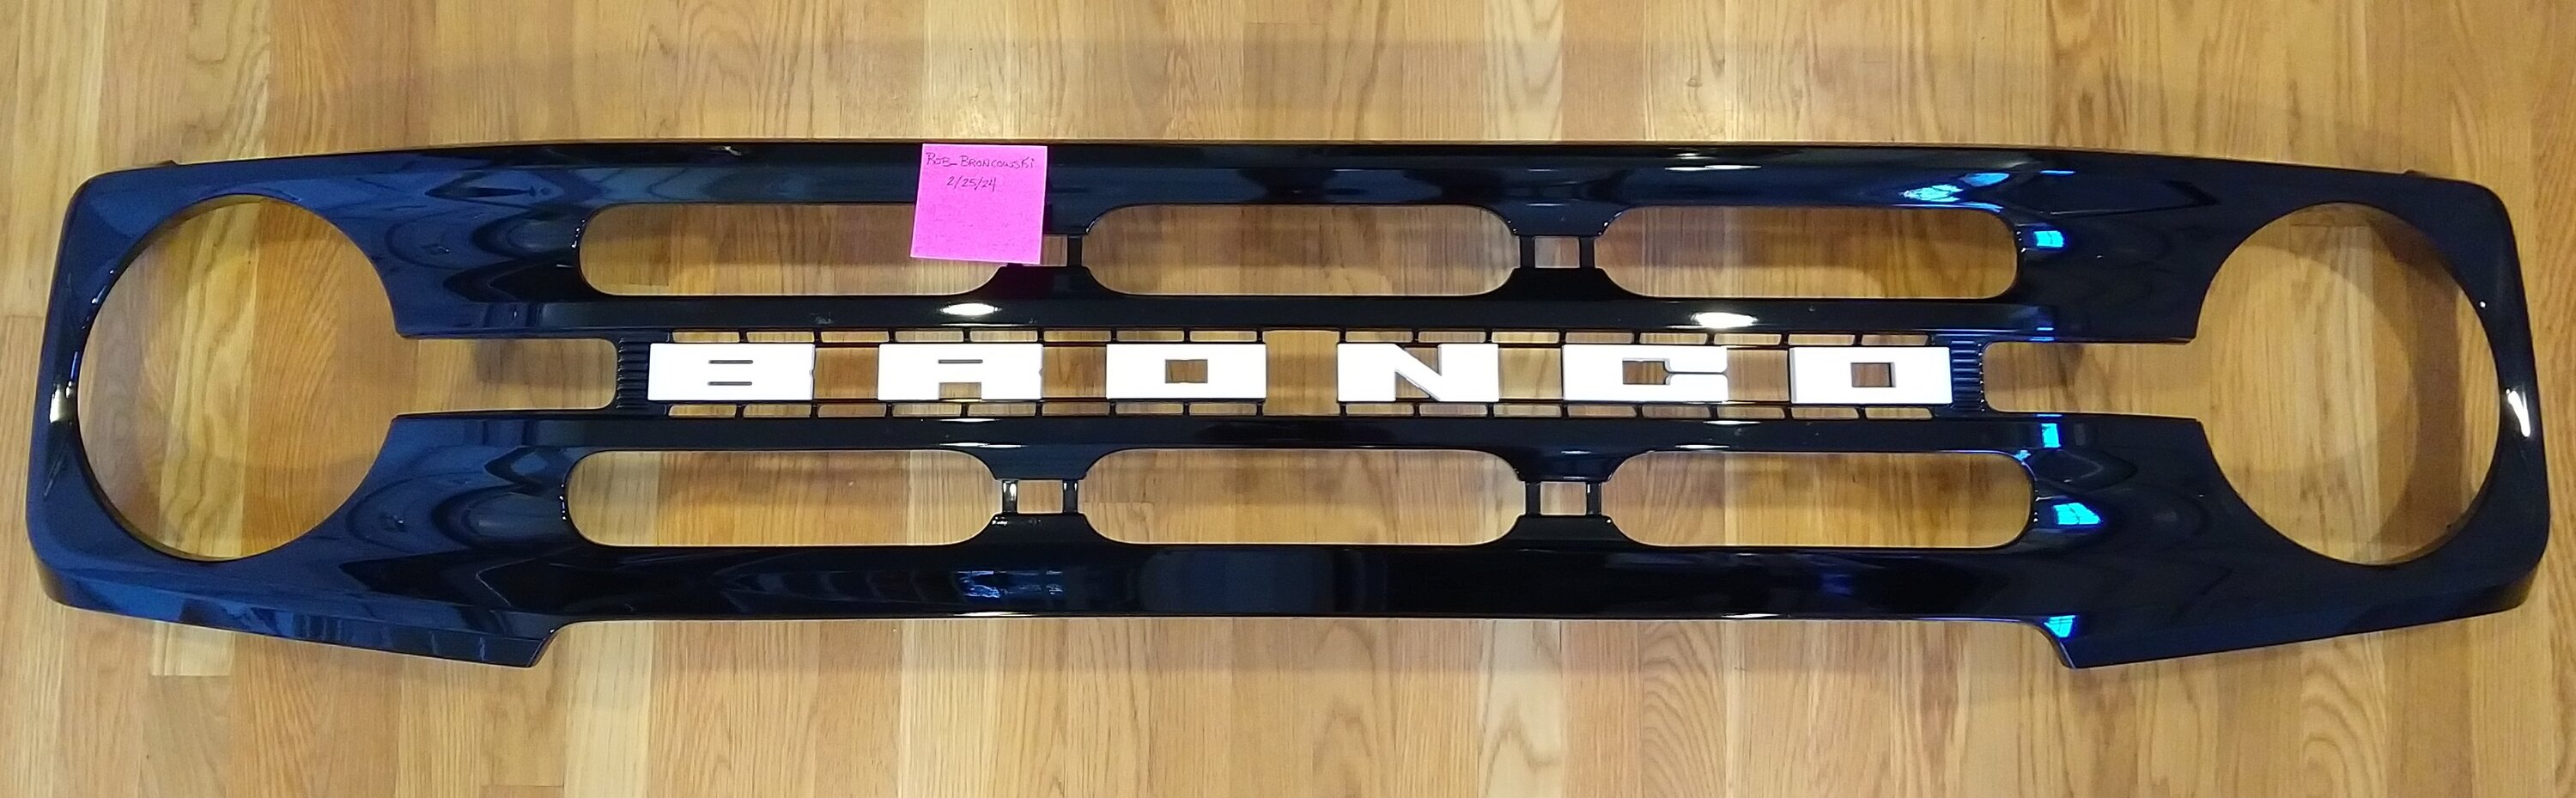 Ford Bronco OBX Grille - $150 IMG_20240225_120740254